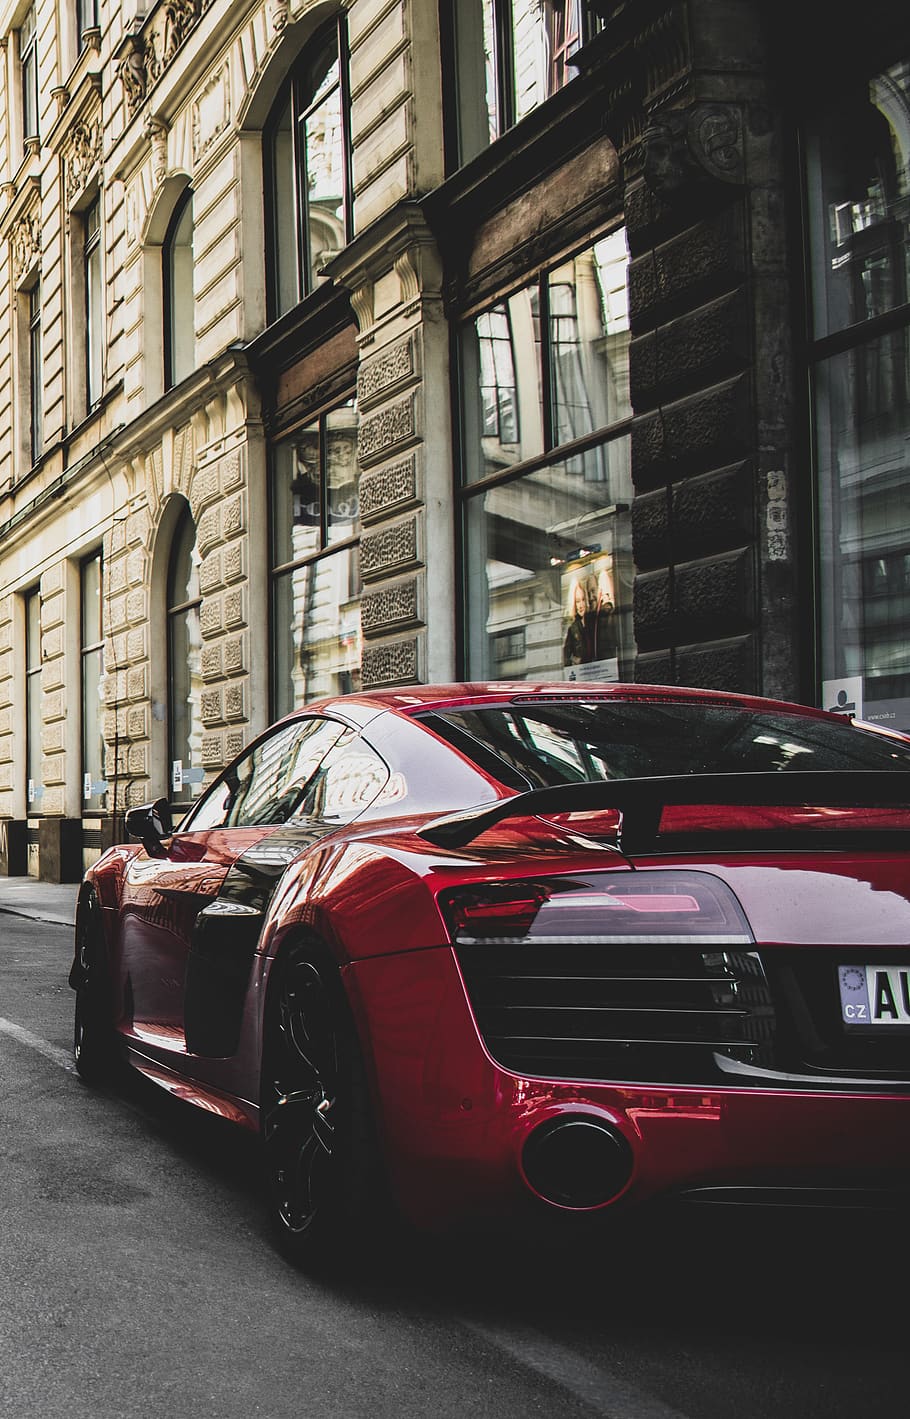 HD wallpaper: Red and Black Audi R8 Coupe Parked Near Gray Concrete  Building | Wallpaper Flare